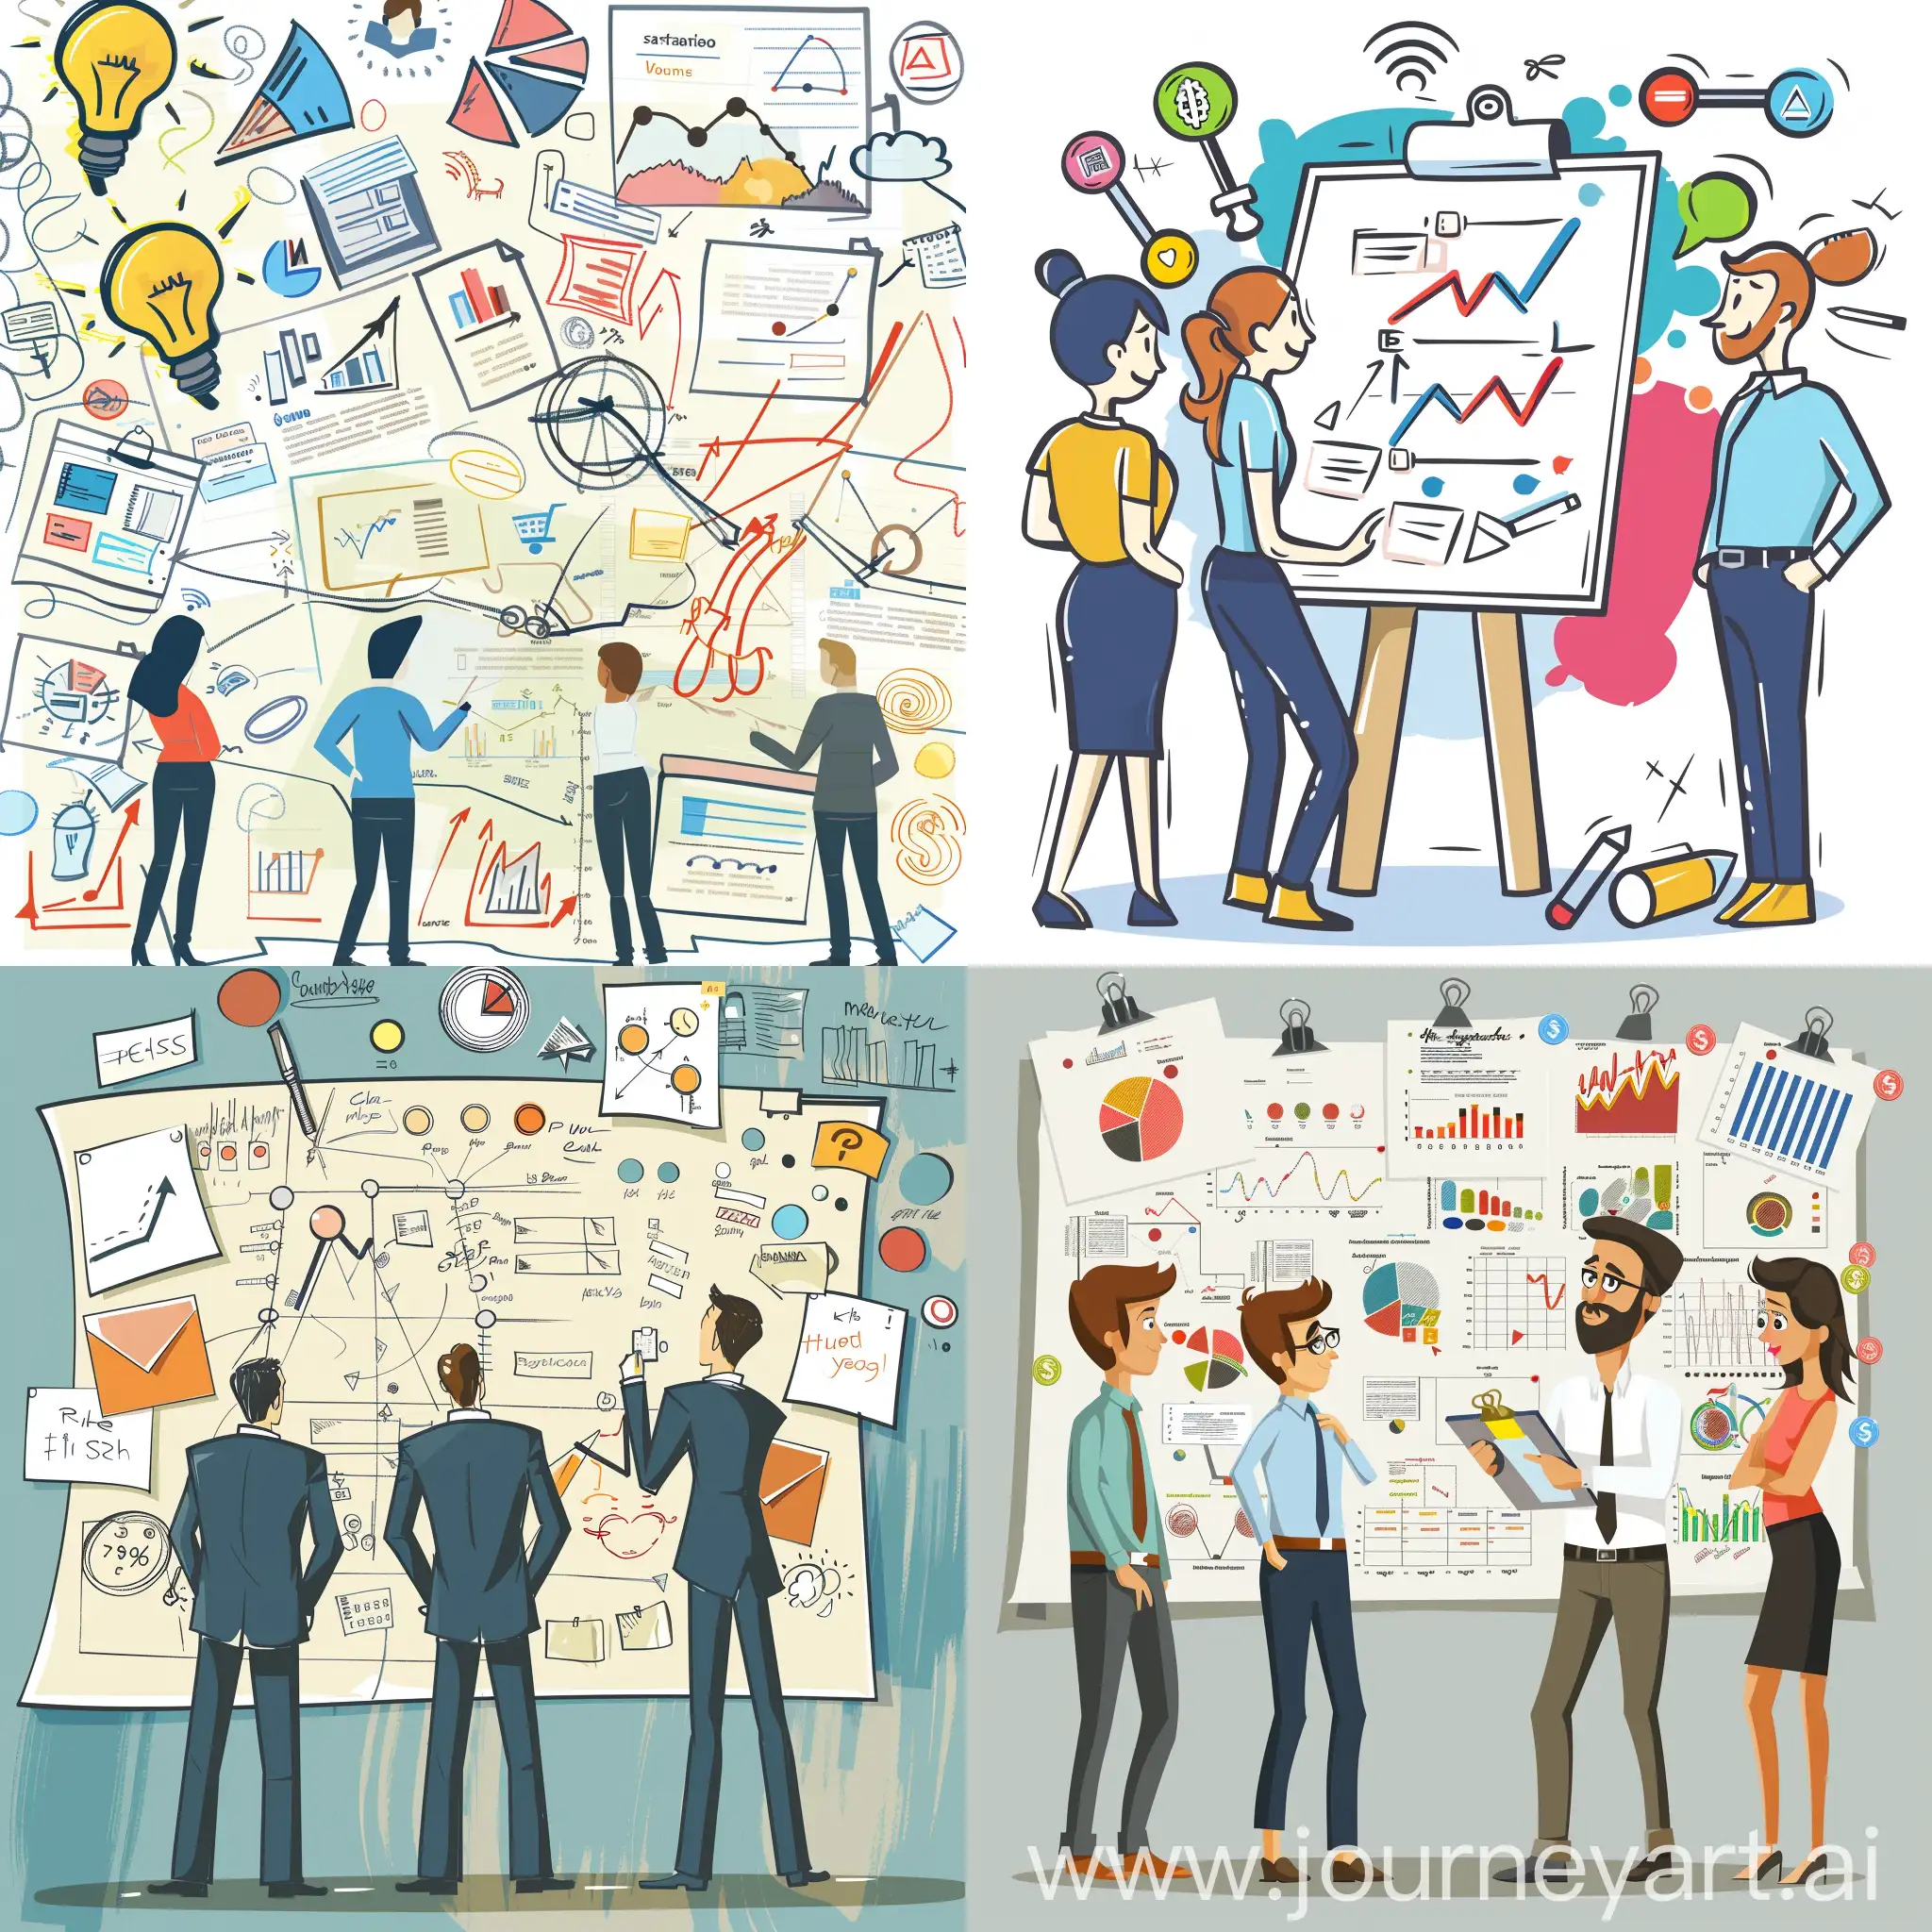 business plan of action, pins, strategy, different ways, hard work, satisfacation. Newspaper cartoon style, caricature